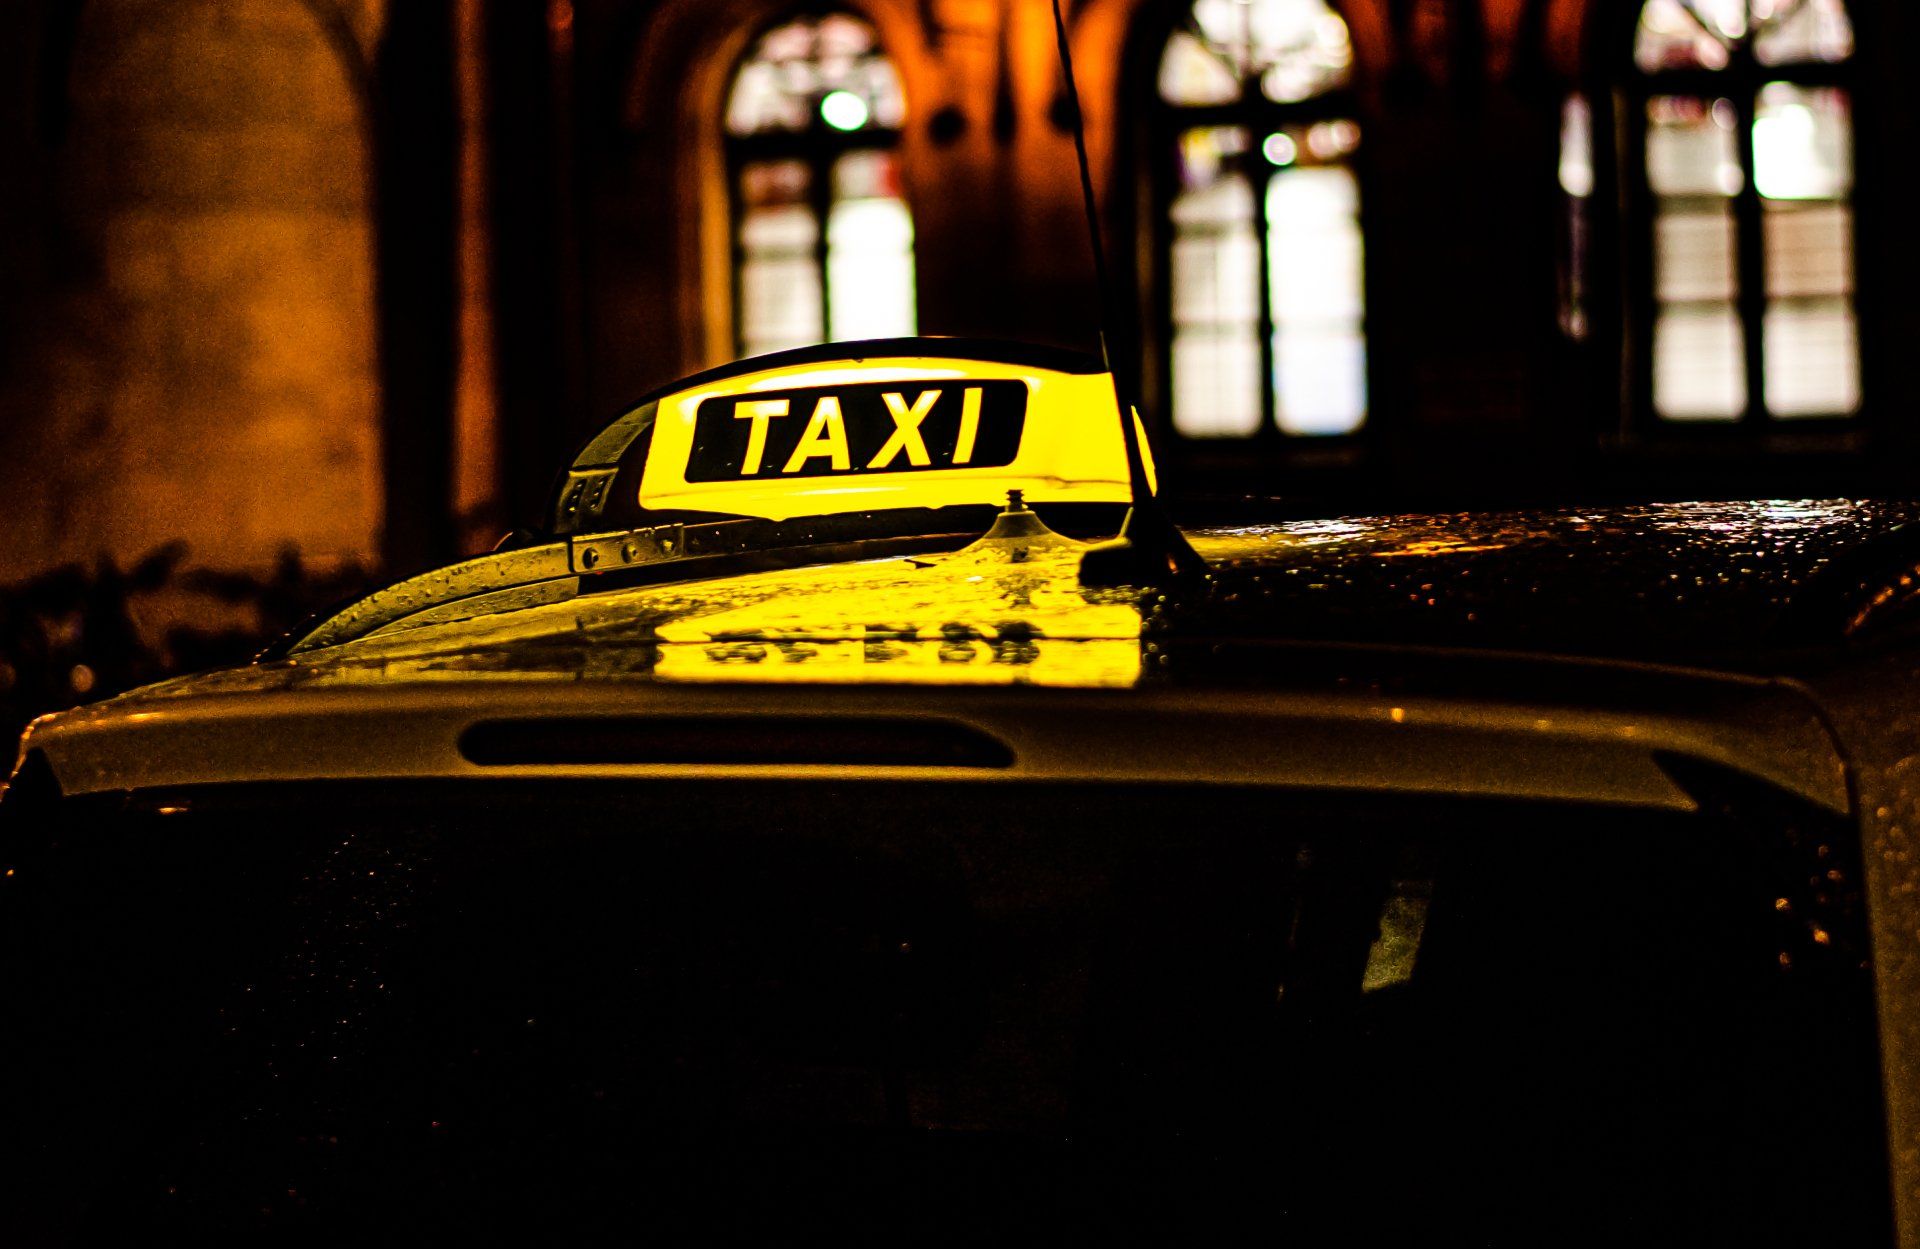 taxi car on the street at night